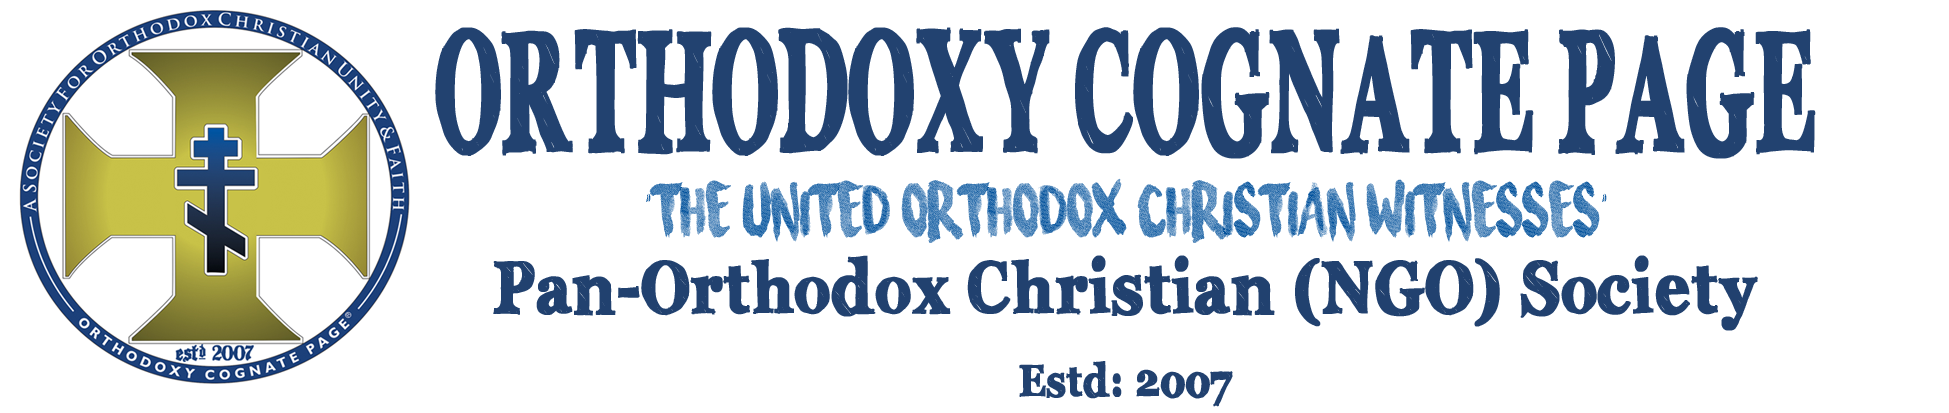 Orthodoxy Cognate PAGE